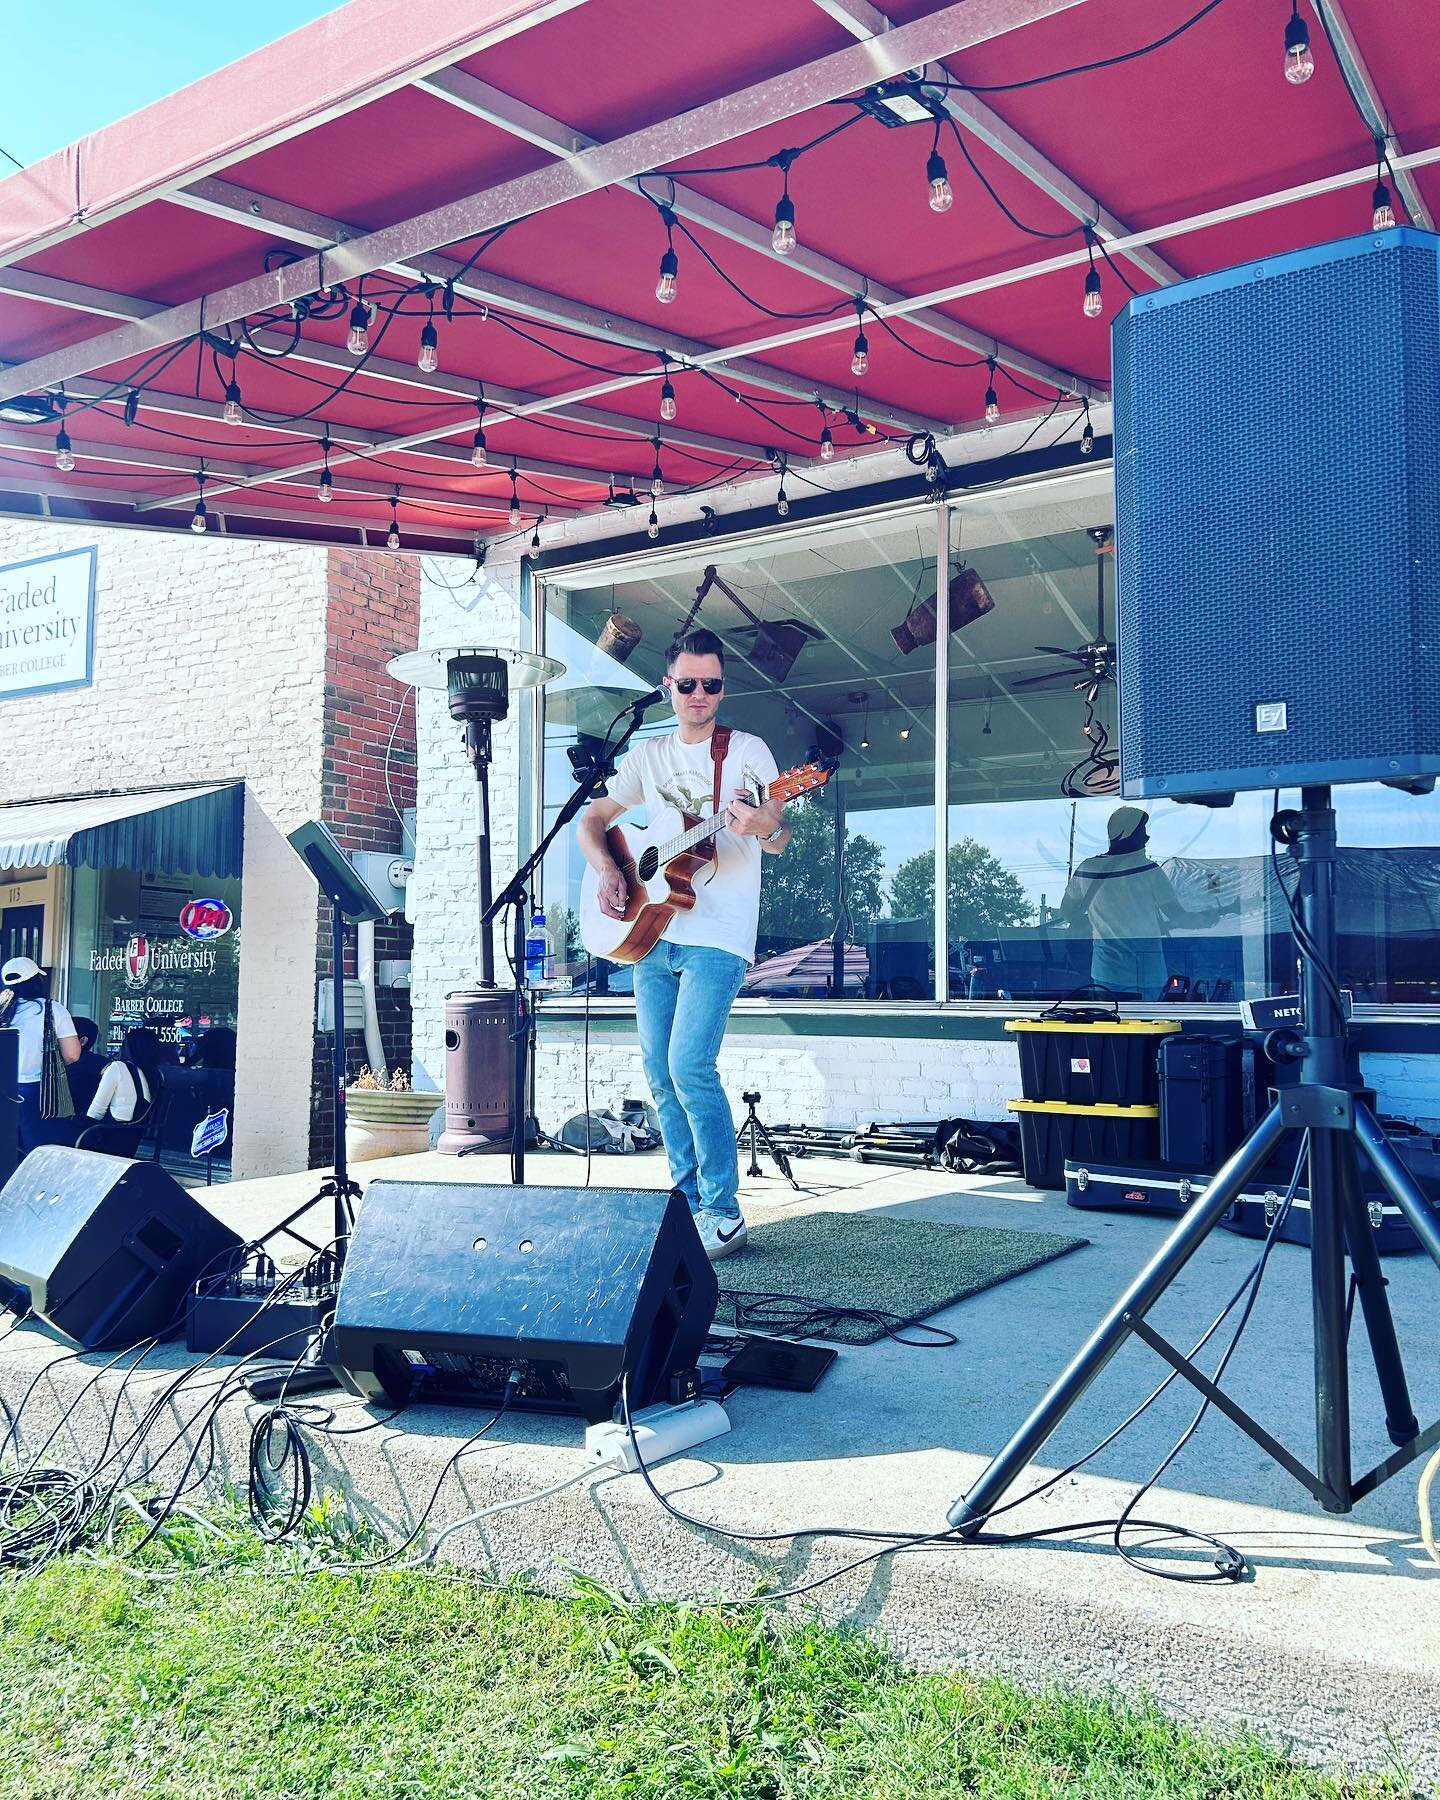 The first day of fall was a good one! Had a great time playing music for Depot Days in historic downtown #SmyrnaTN. What an awesome event for our local community&hellip; thanks to @carpe_cafe and @carpeartista for all they do and having me out to per